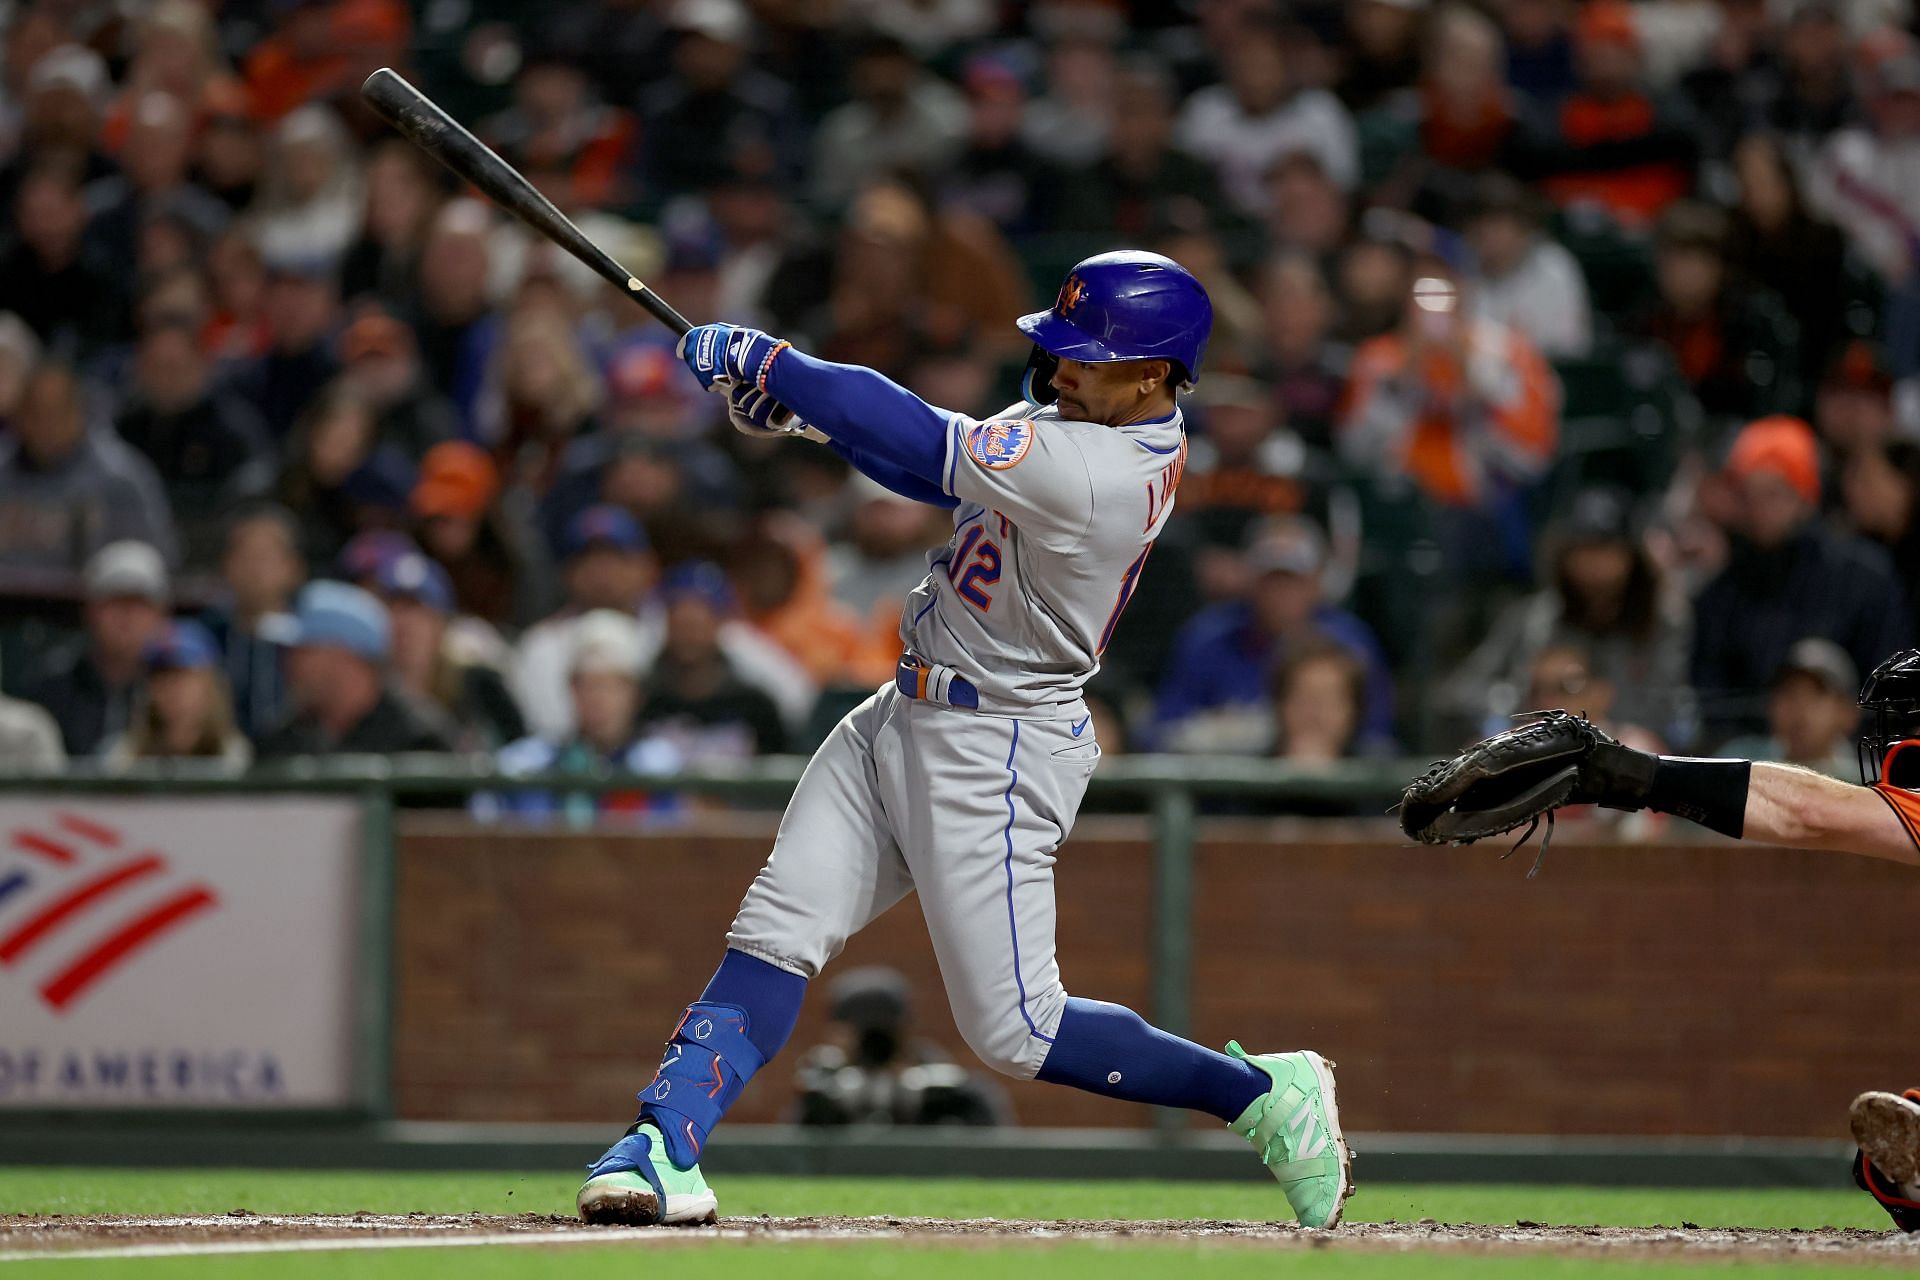 Francisco Lindor of the New York Mets bats against the San Francisco Giants at Oracle Park